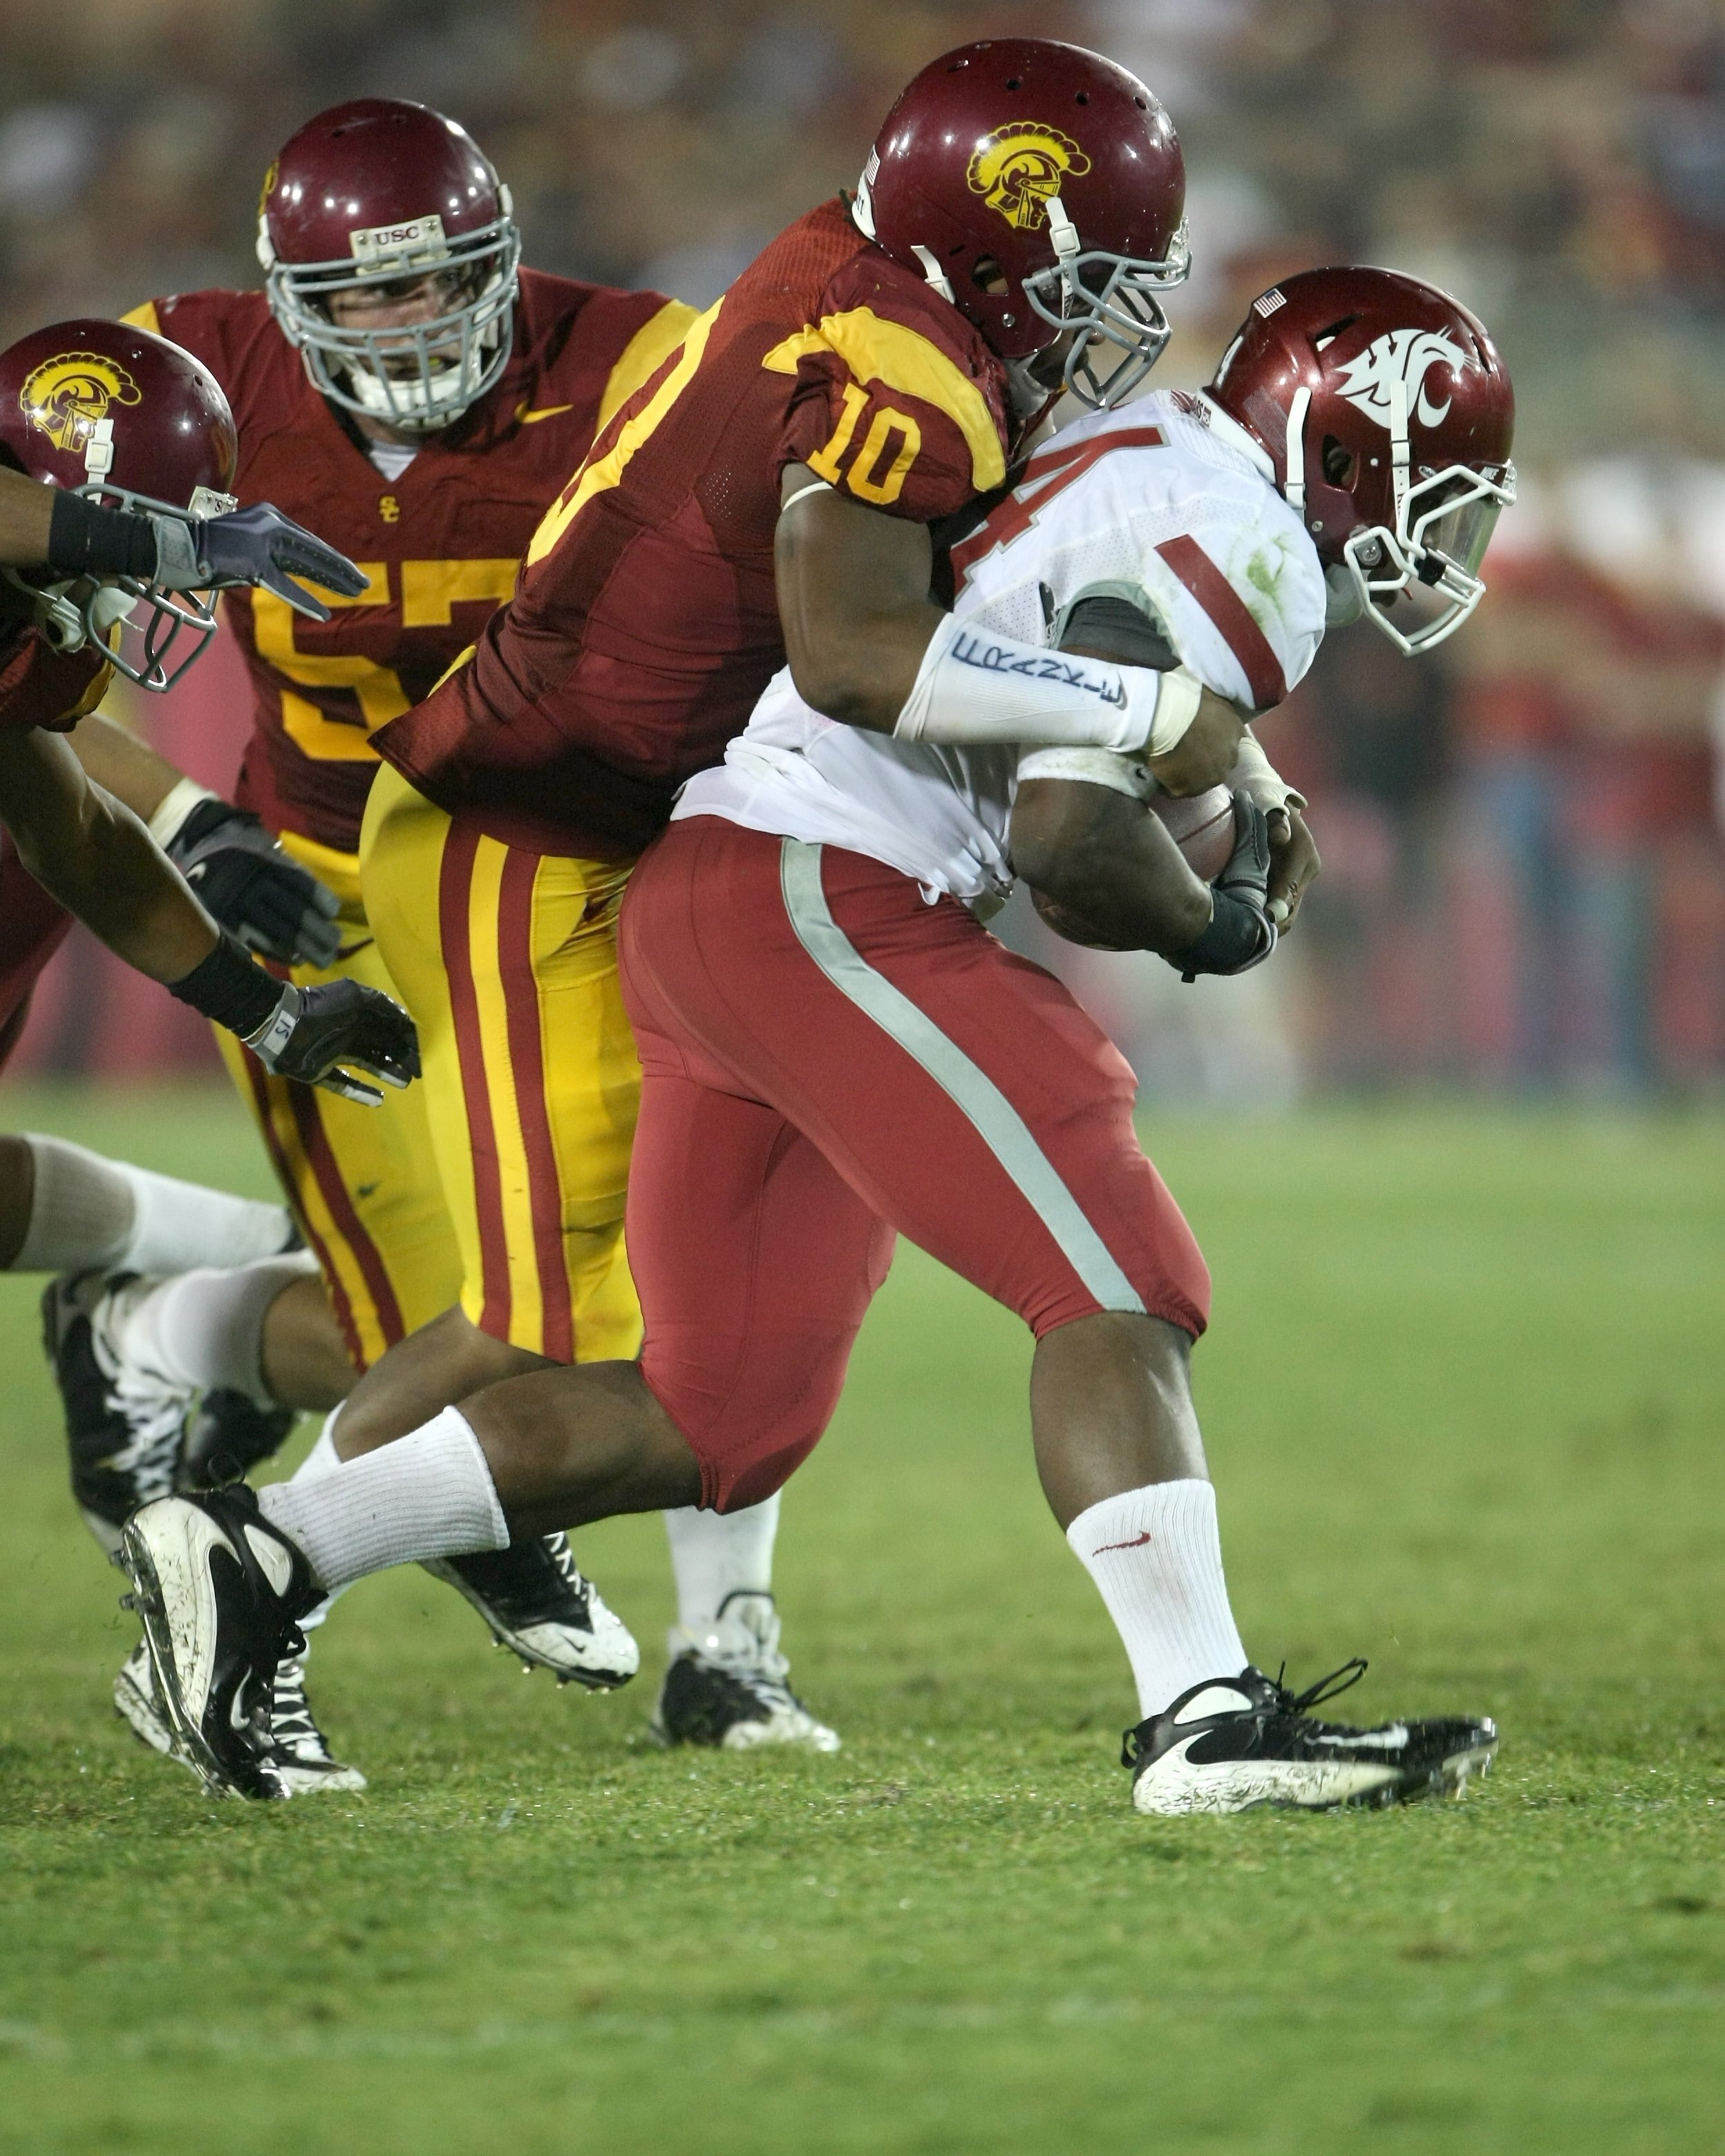 LOS ANGELES, CA - SEPTEMBER 26:  Linebacker Jarvis Jones #10 of the USC Trojans tackles running back Logwone Mitz #34 of the Washington State Cougars on September 23, 2009 at the Los Angeles Coliseum in Los Angeles, California.  USC won 27-6.  (Photo by S